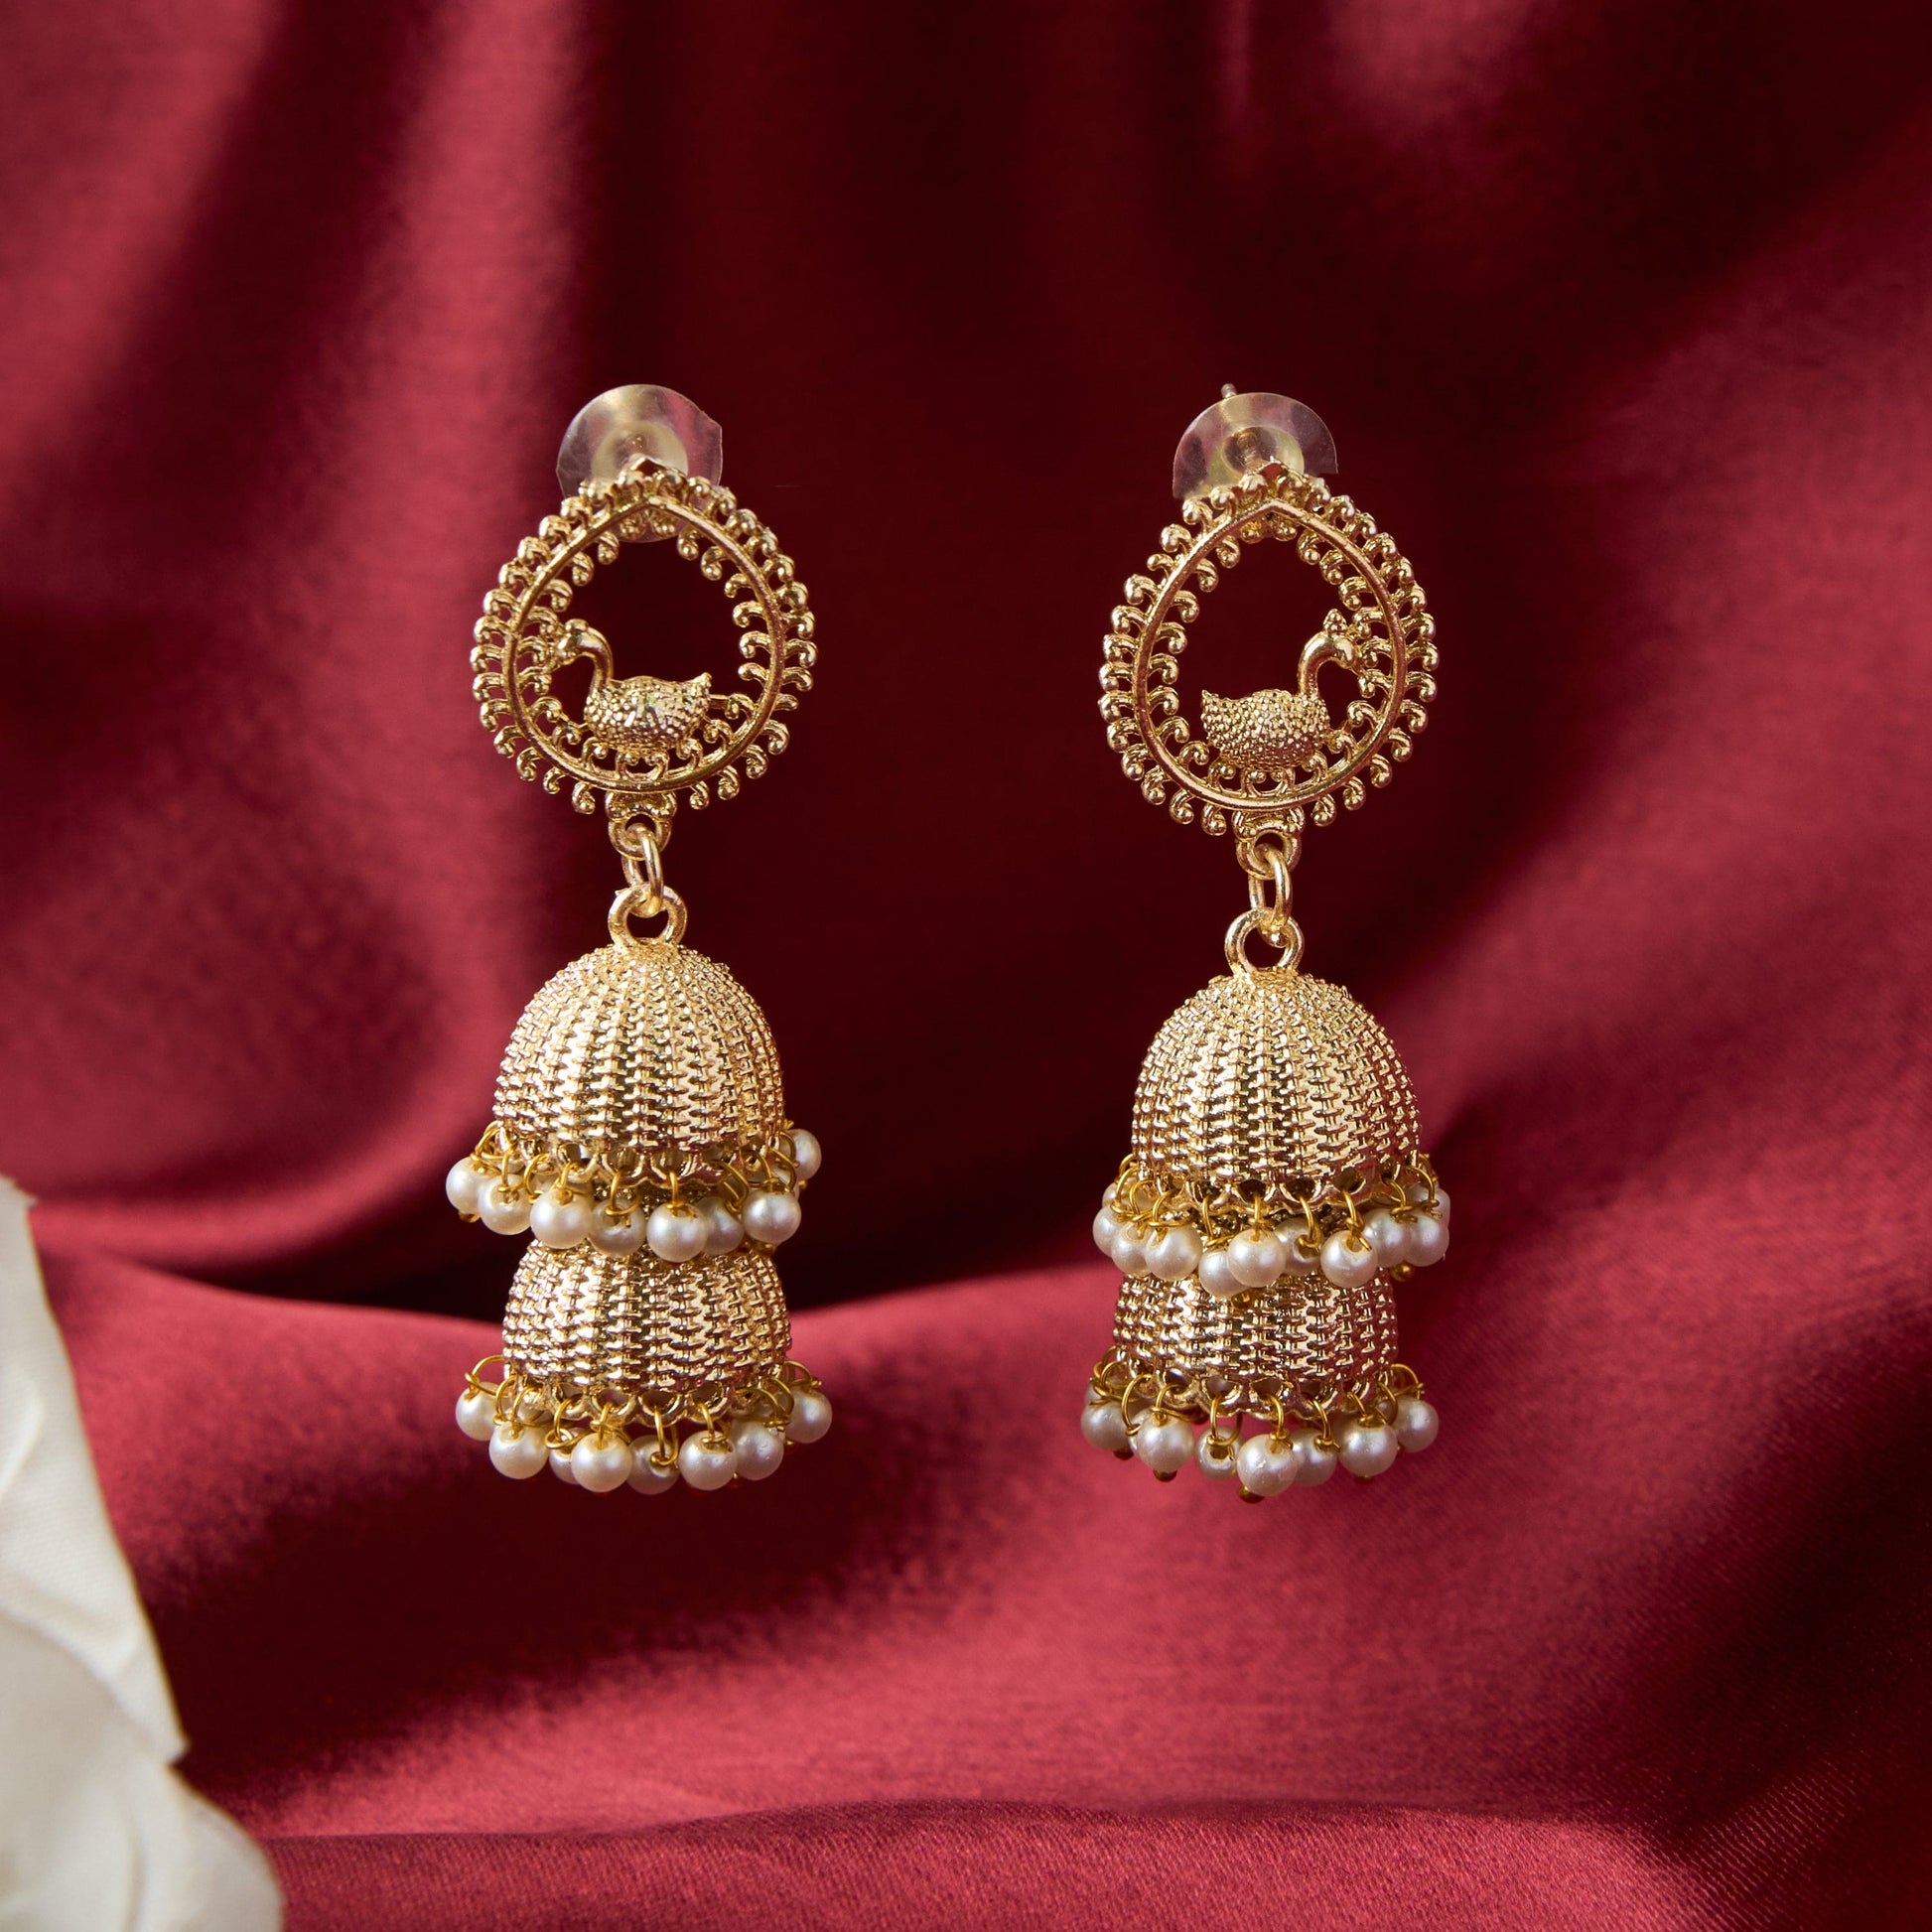 Moonstruck Bollywood Traditional Indian Gold/Golden Jhumka/Jhumki Earrings With Pearls Peacock Style For Women - www.MoonstruckINC.com